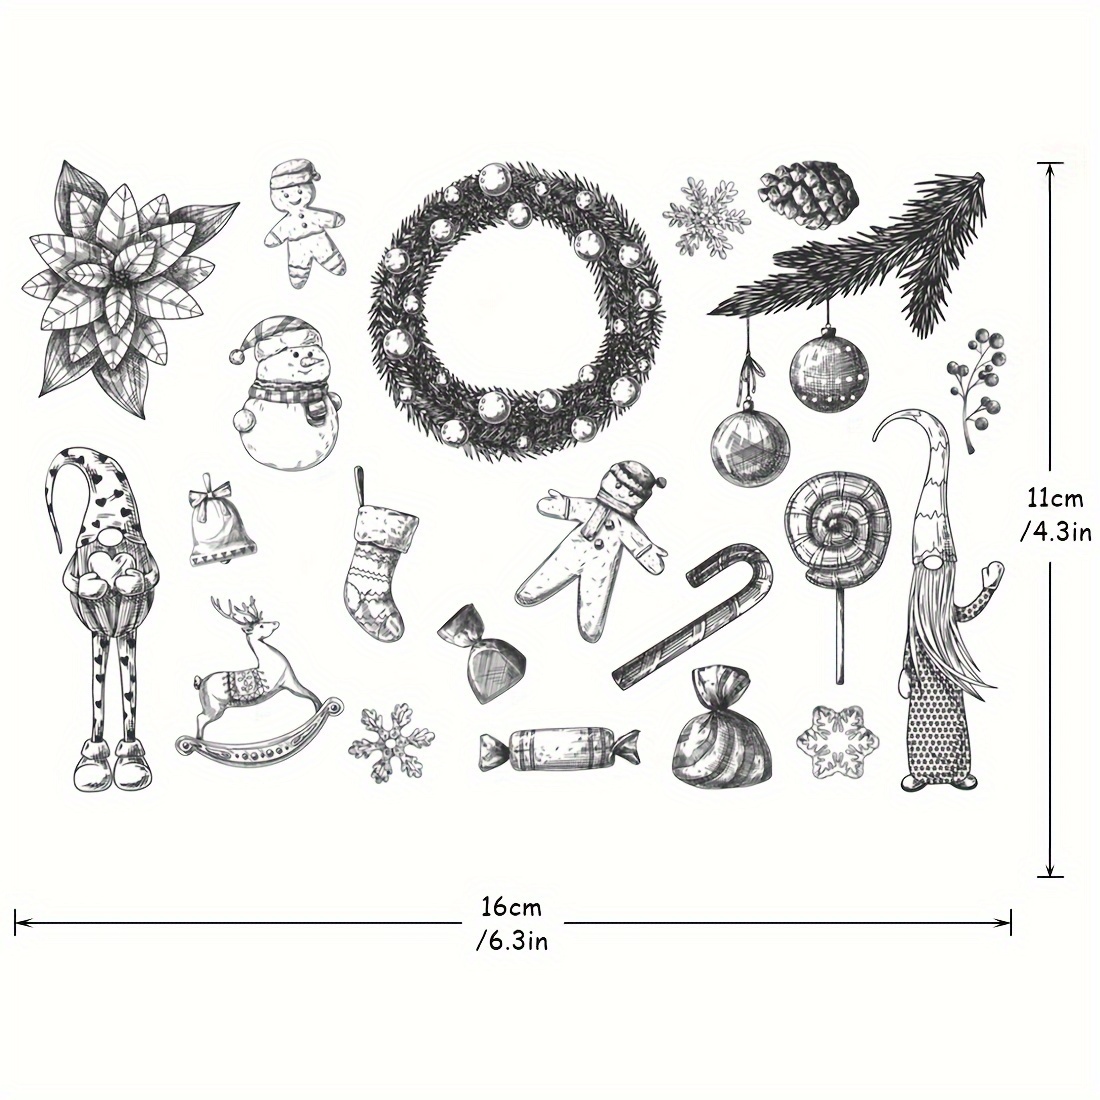 P6VRP8Z Kwan Crafts Merry Christmas Happy Bright Merry Birthday  Congratulations Deer Clear Stamps for Card Making Decoration and DIY